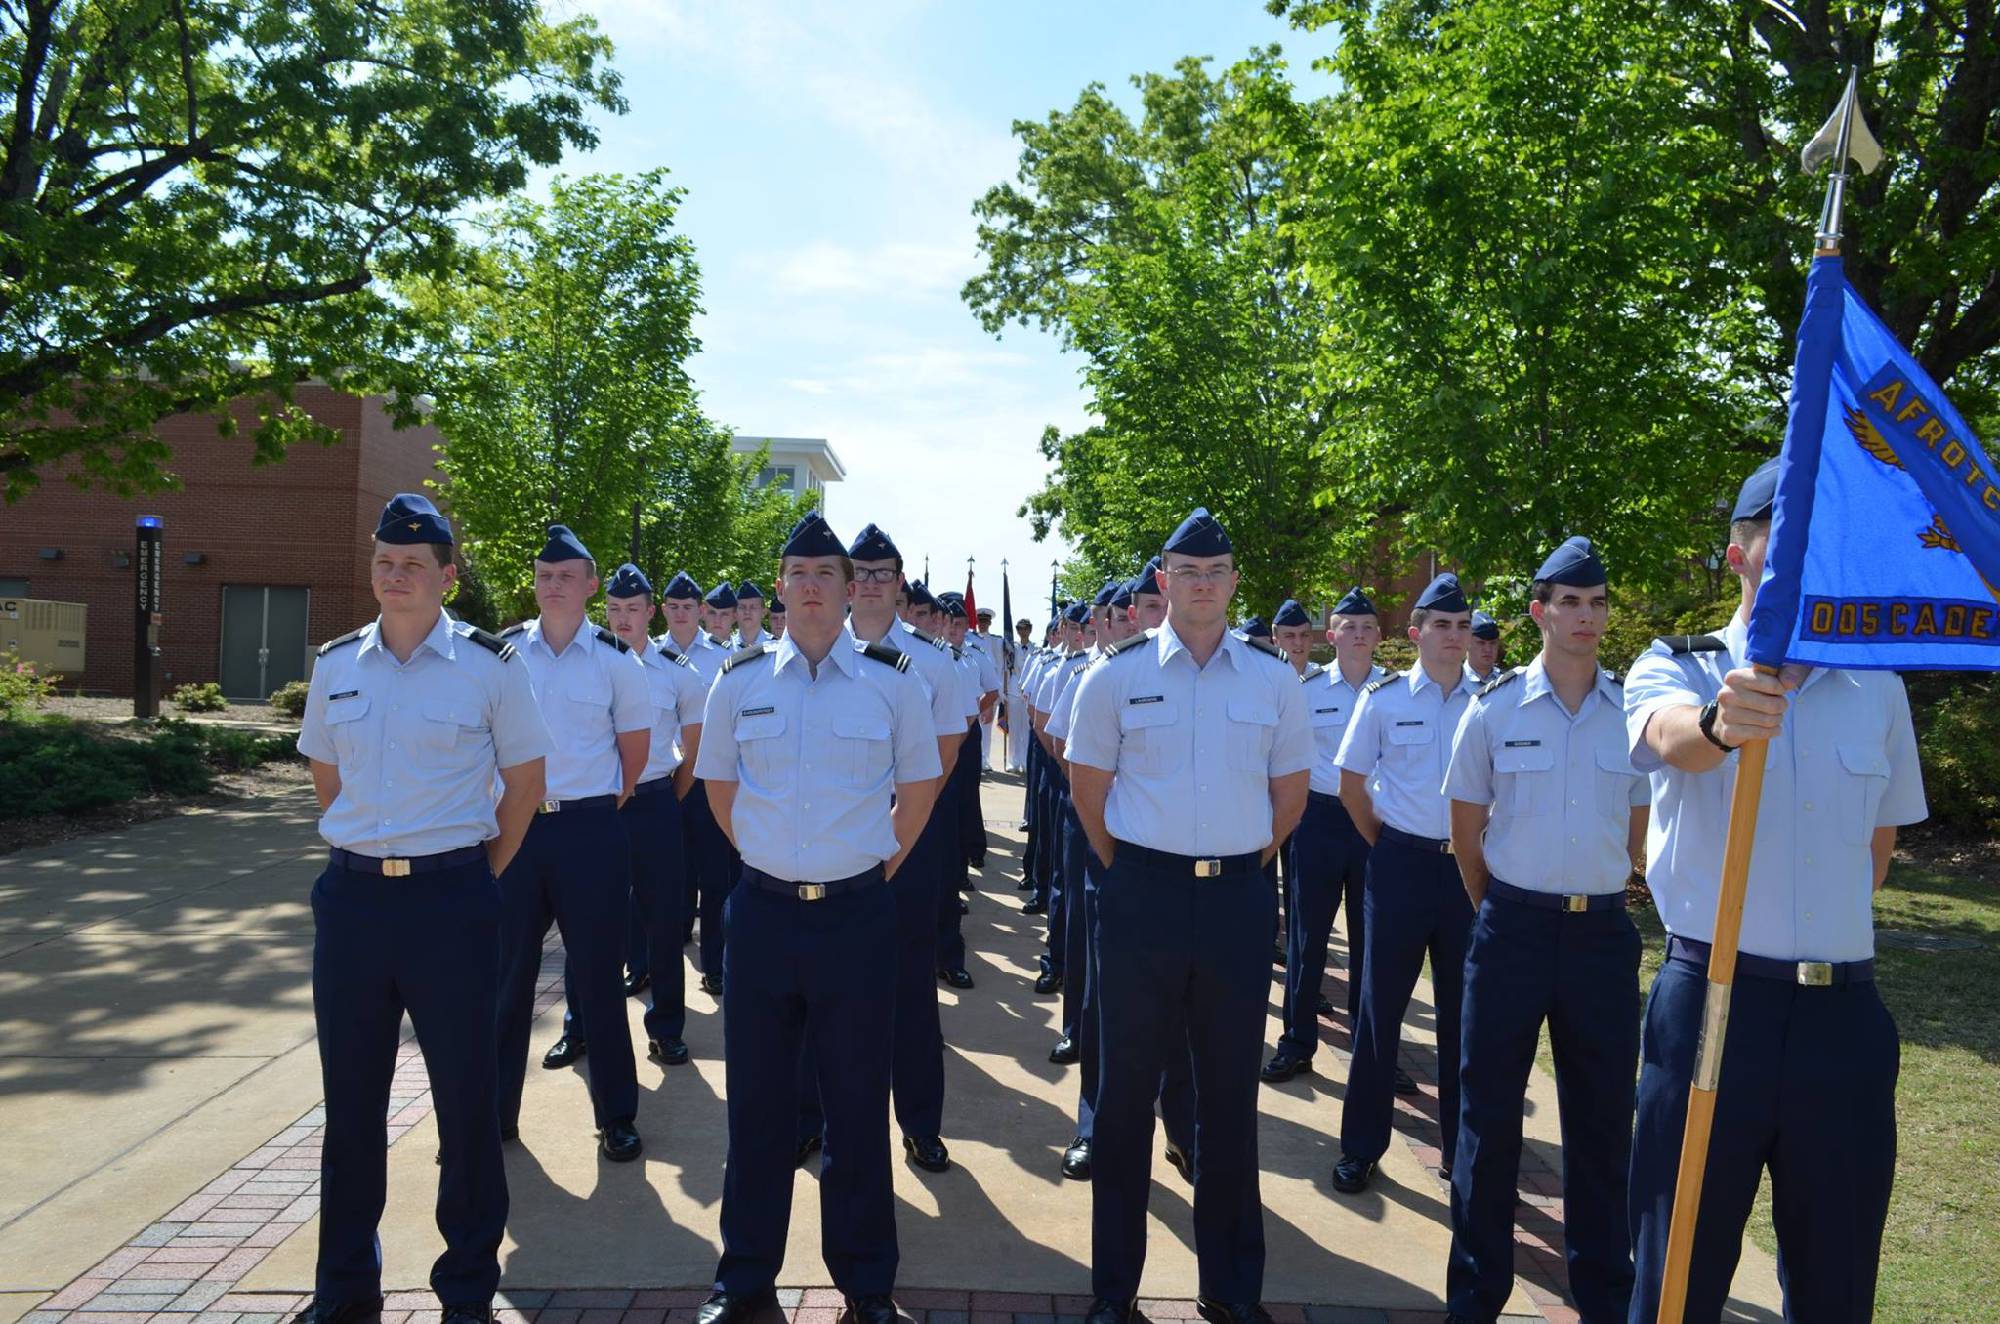 AFROTC students in uniform with flag.